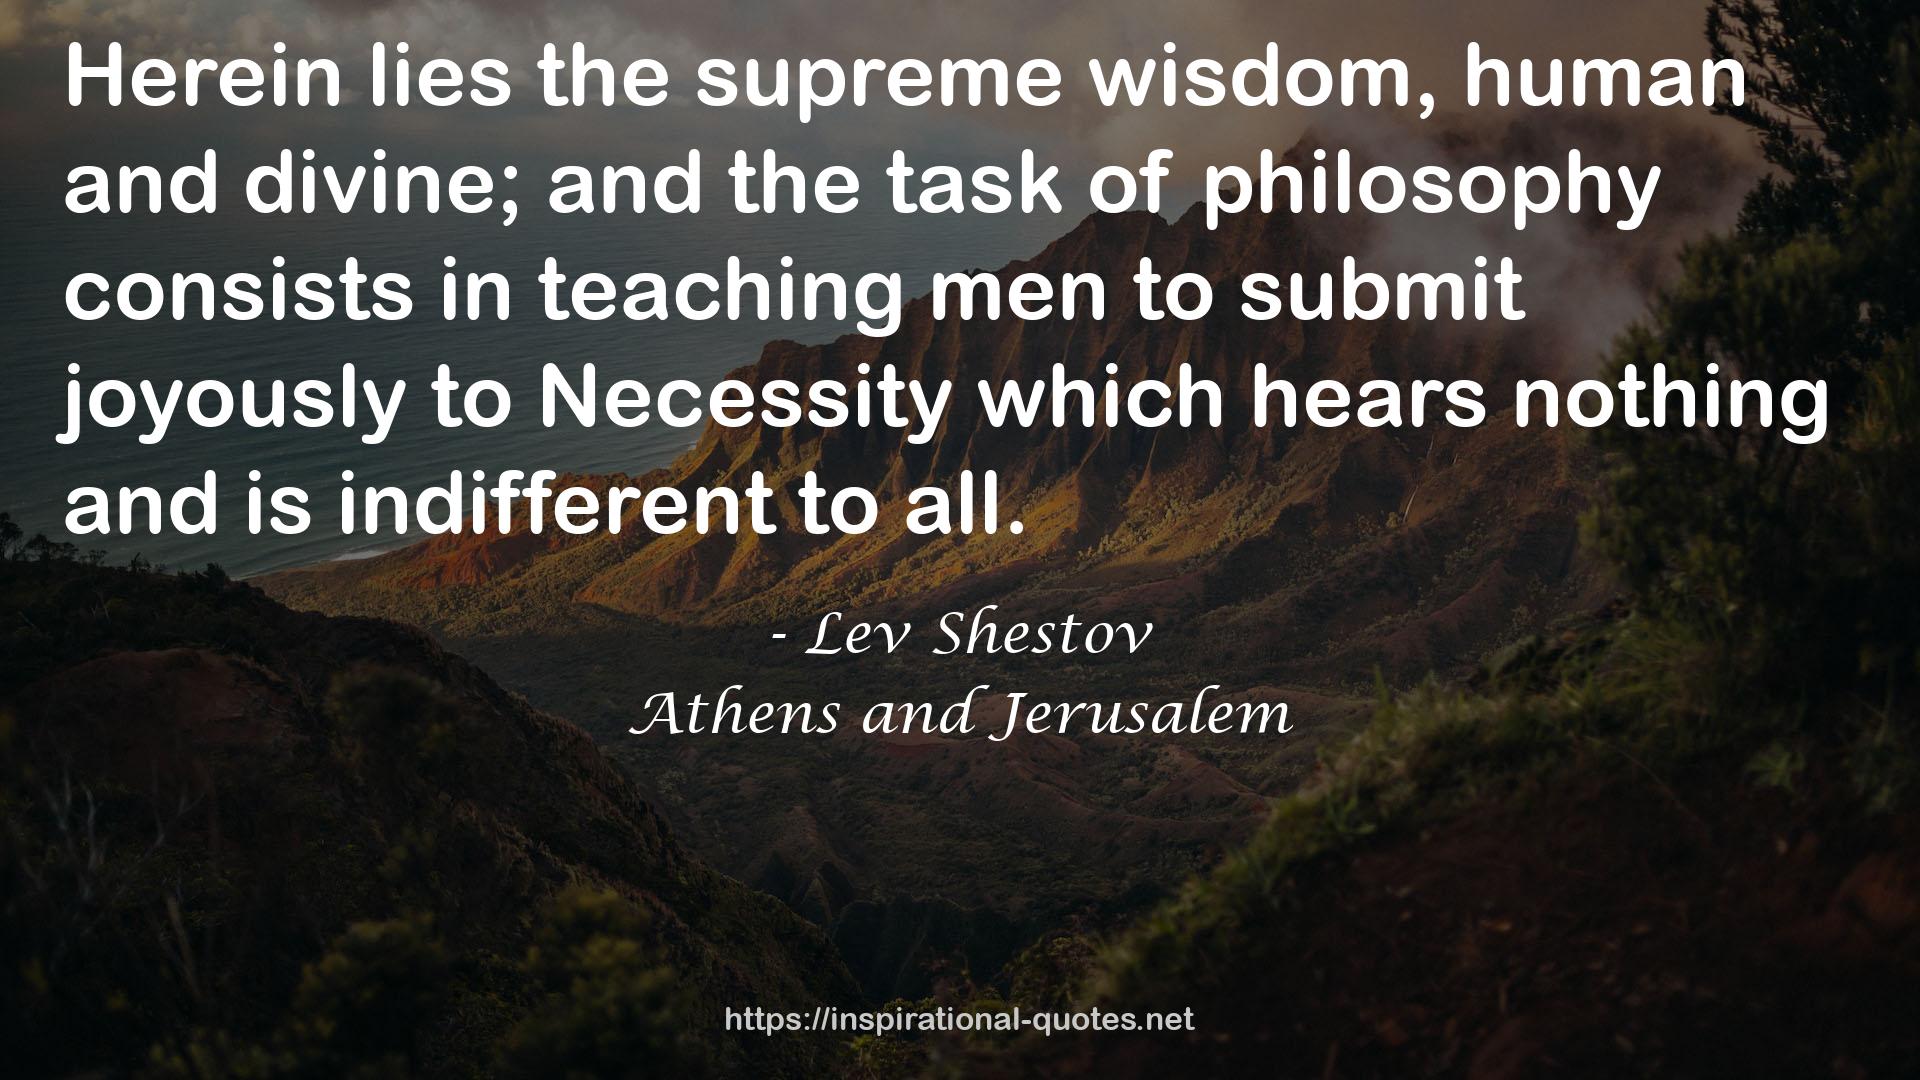 Athens and Jerusalem QUOTES